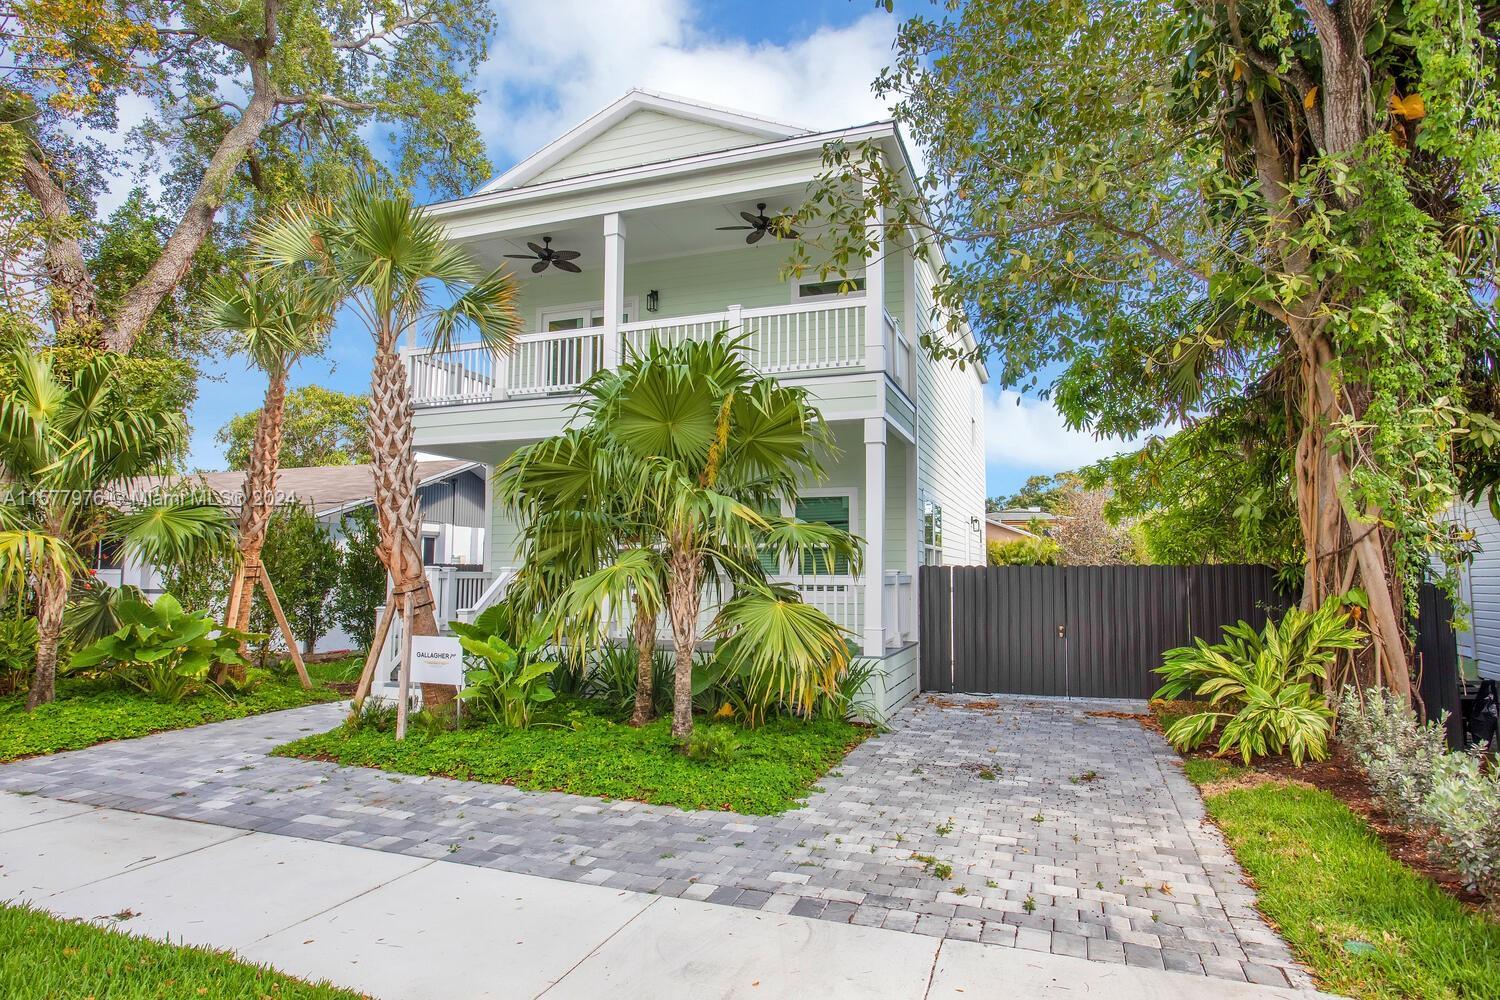 Rare opportunity to live in a new construction home within walking distance to Coconut Grove’s trend